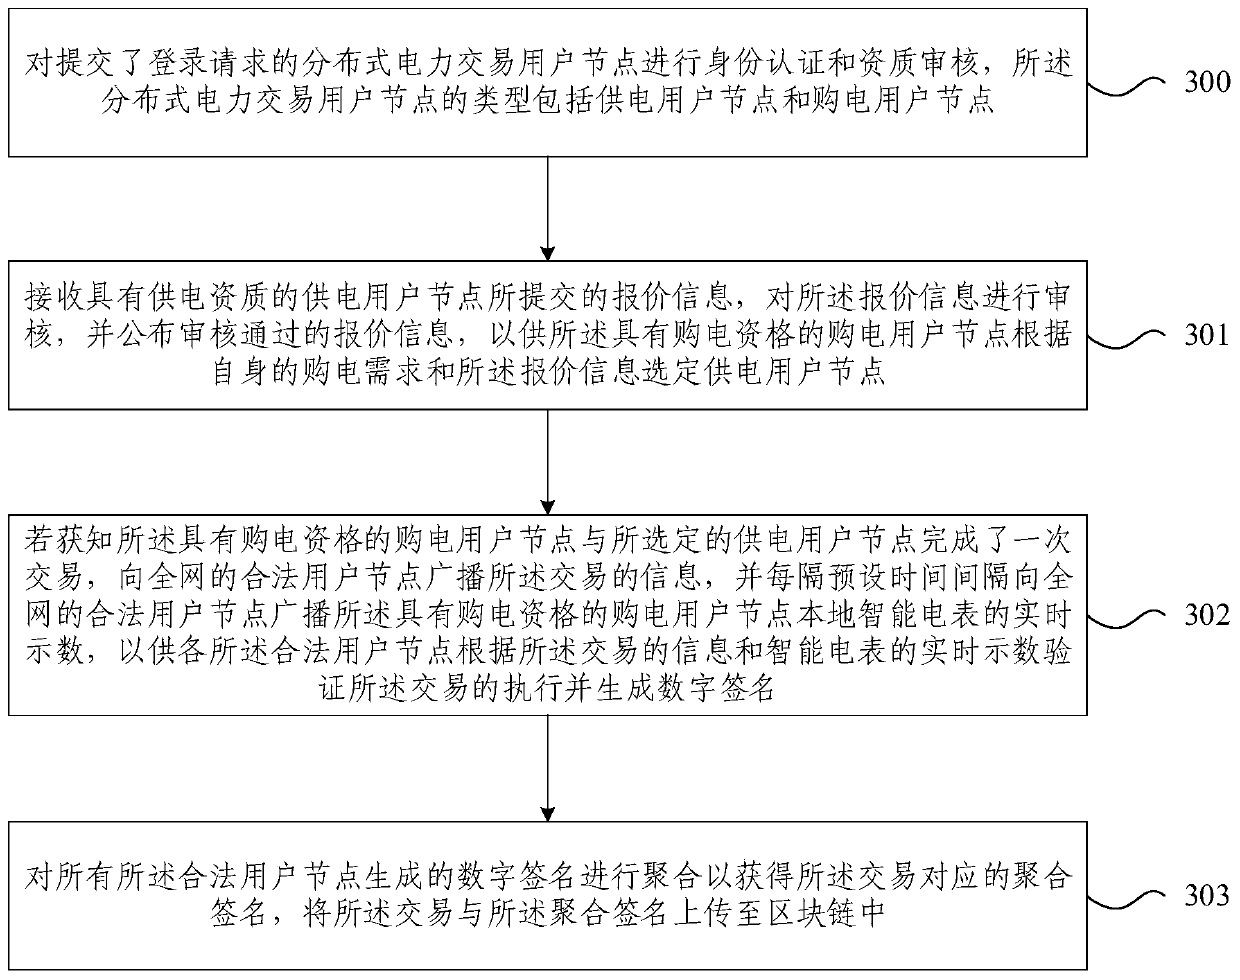 Distributed power transaction system and method based on block chain